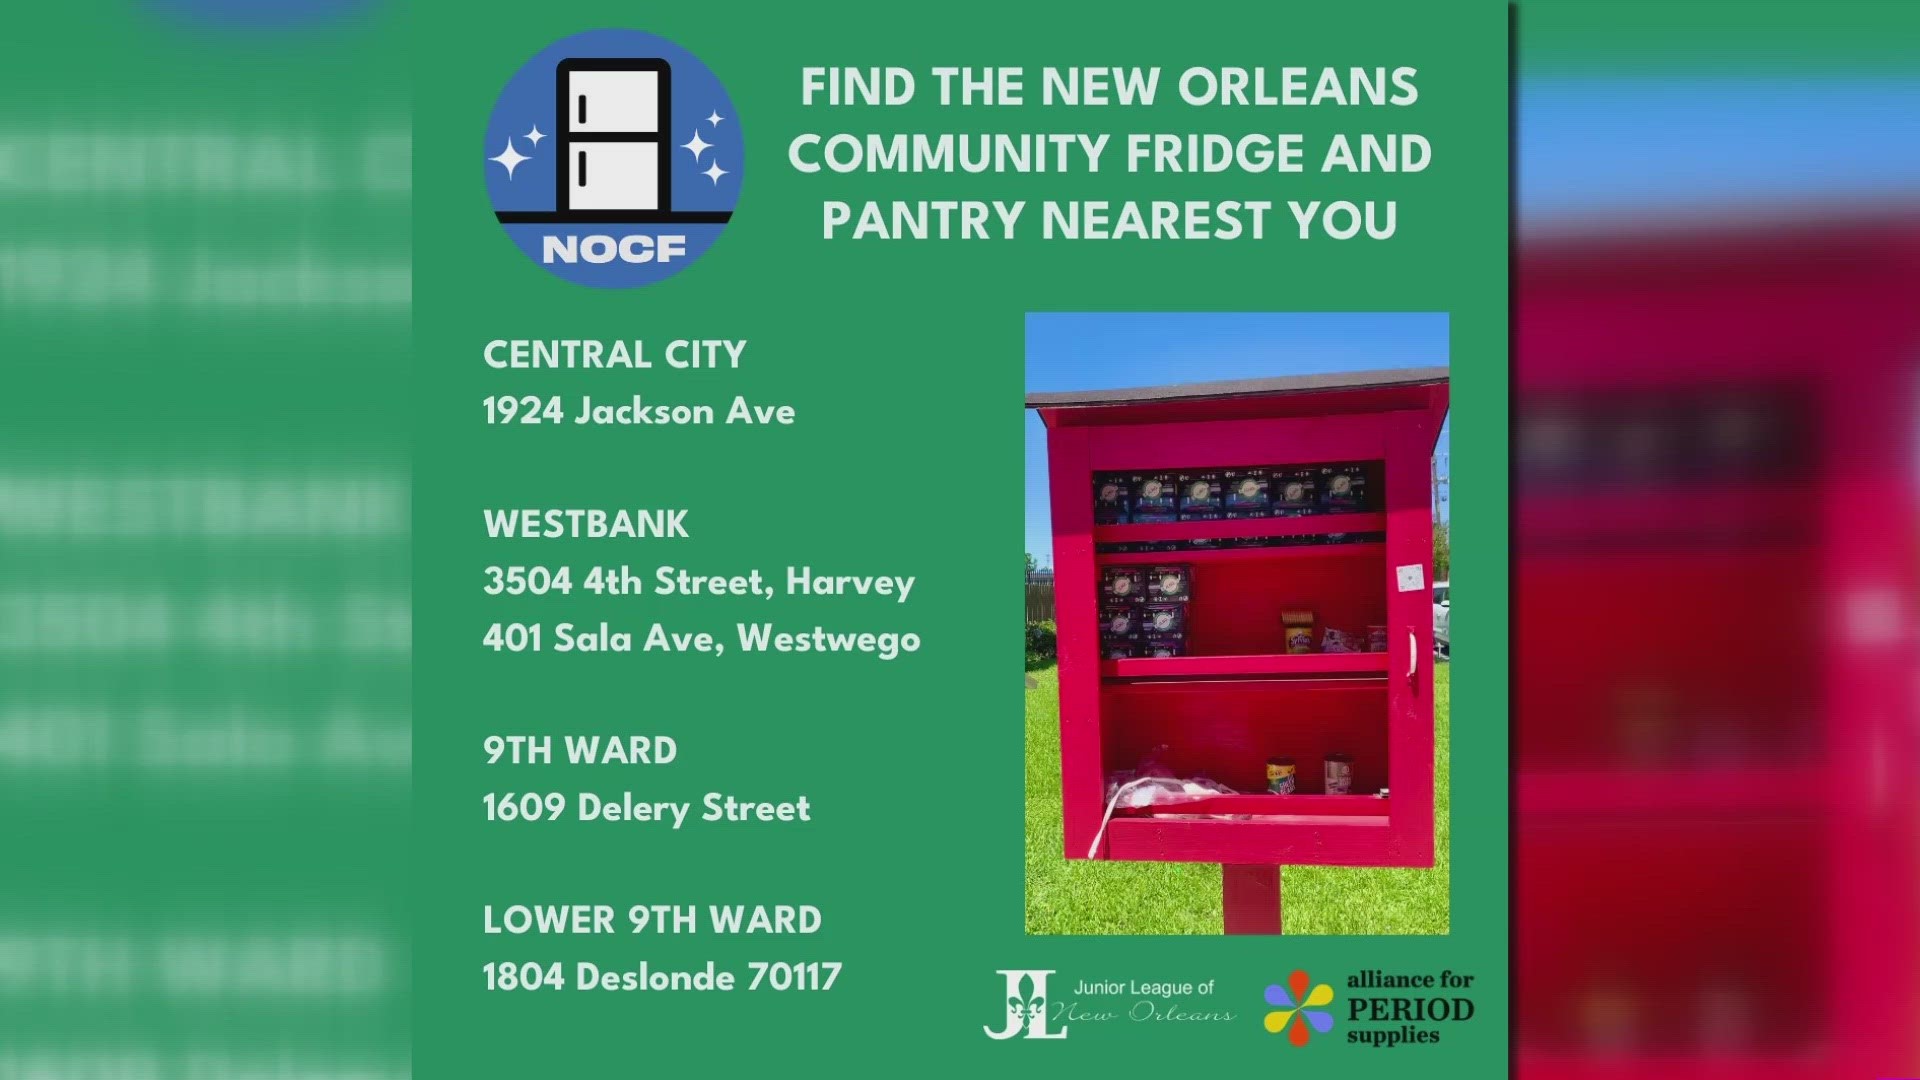 In recognition of Period Poverty Awareness Week May 22-28, the Junior League of New Orleans is distributing free period supplies in New Orleans.